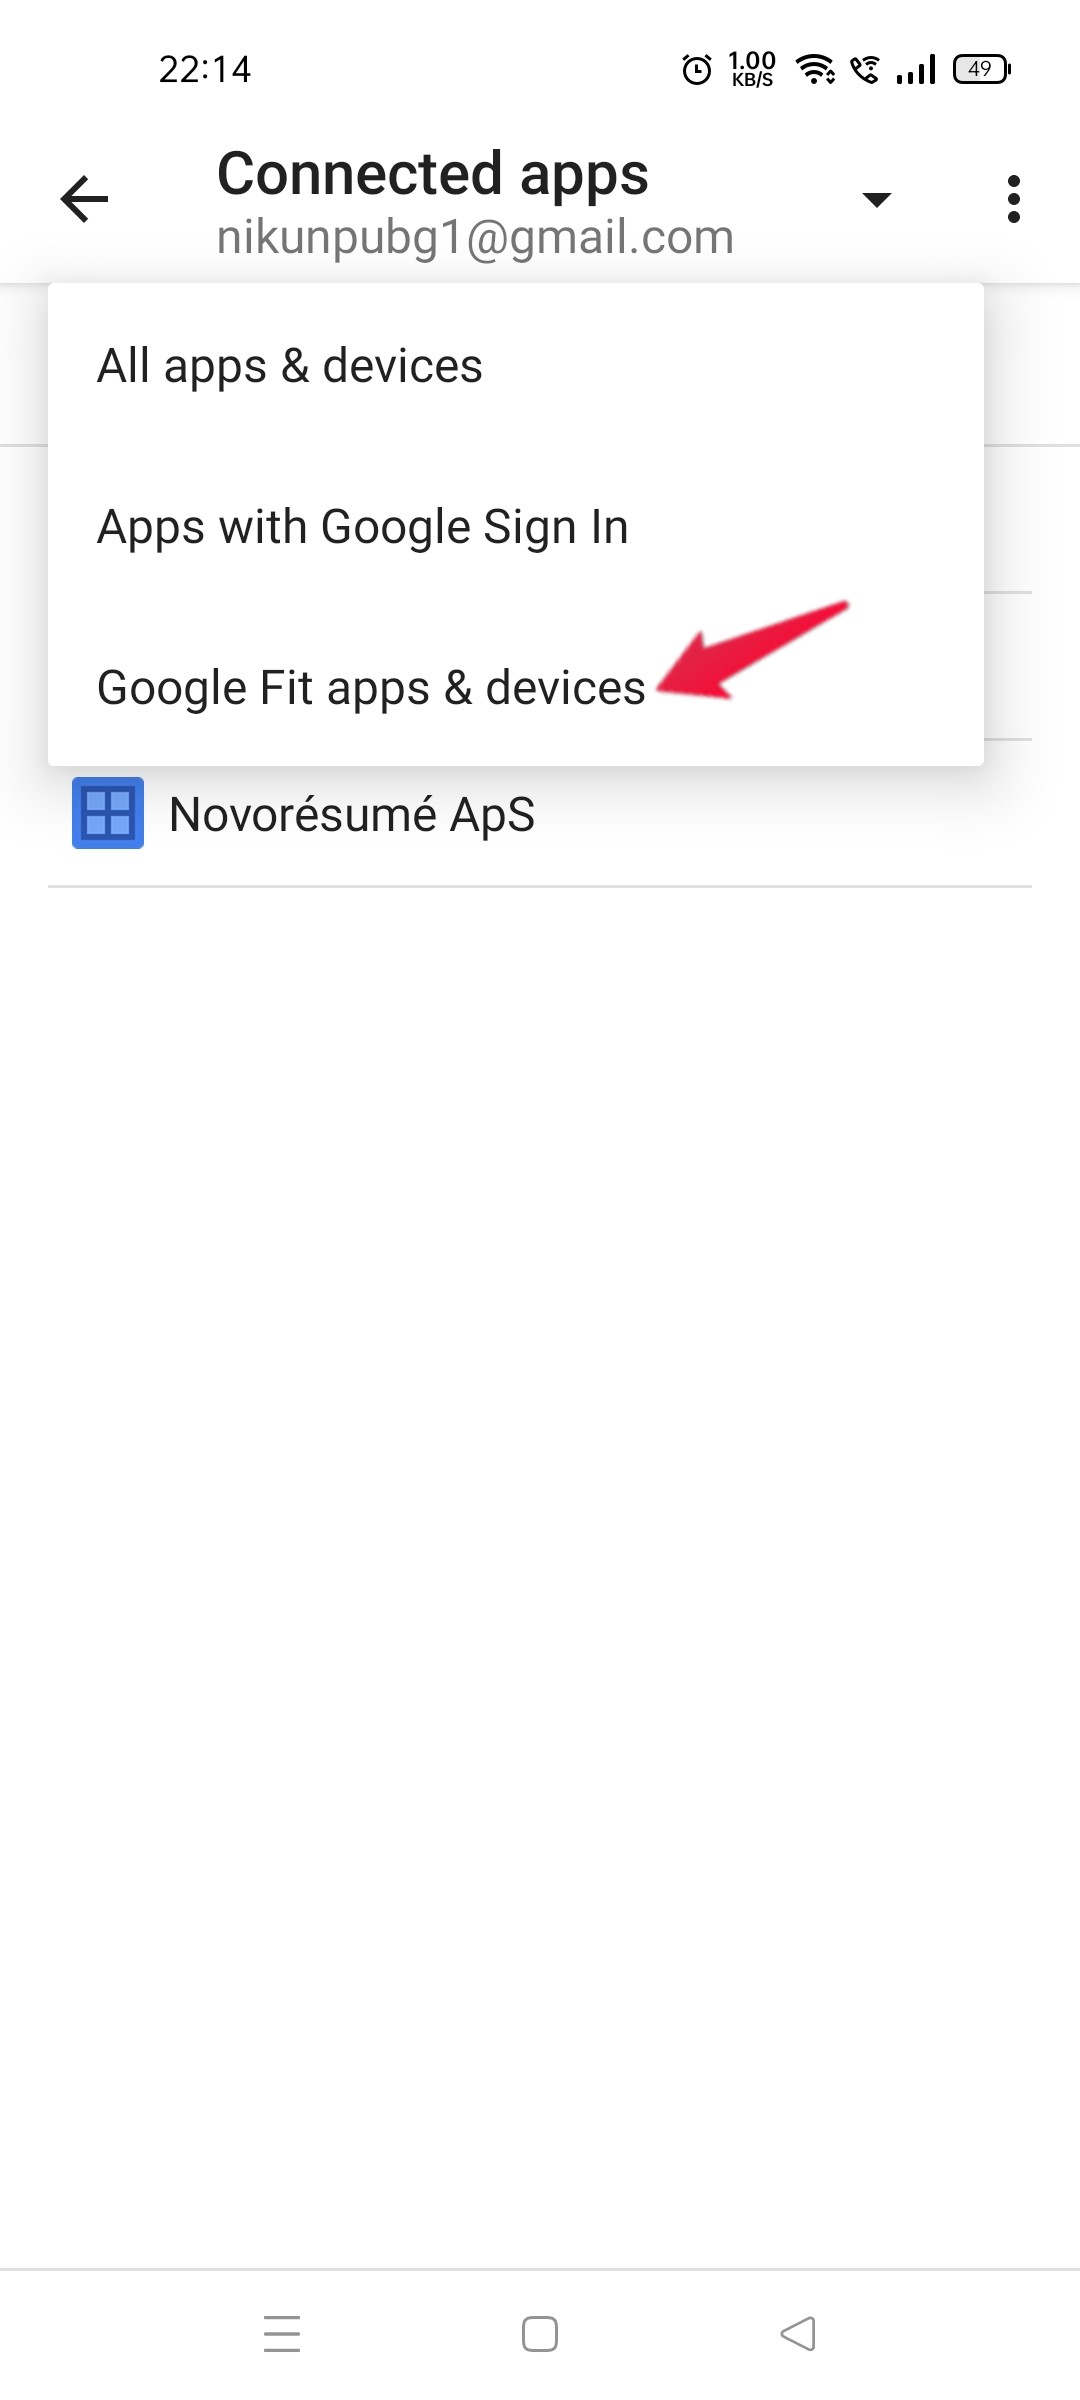 Google Fit Apps and Devices